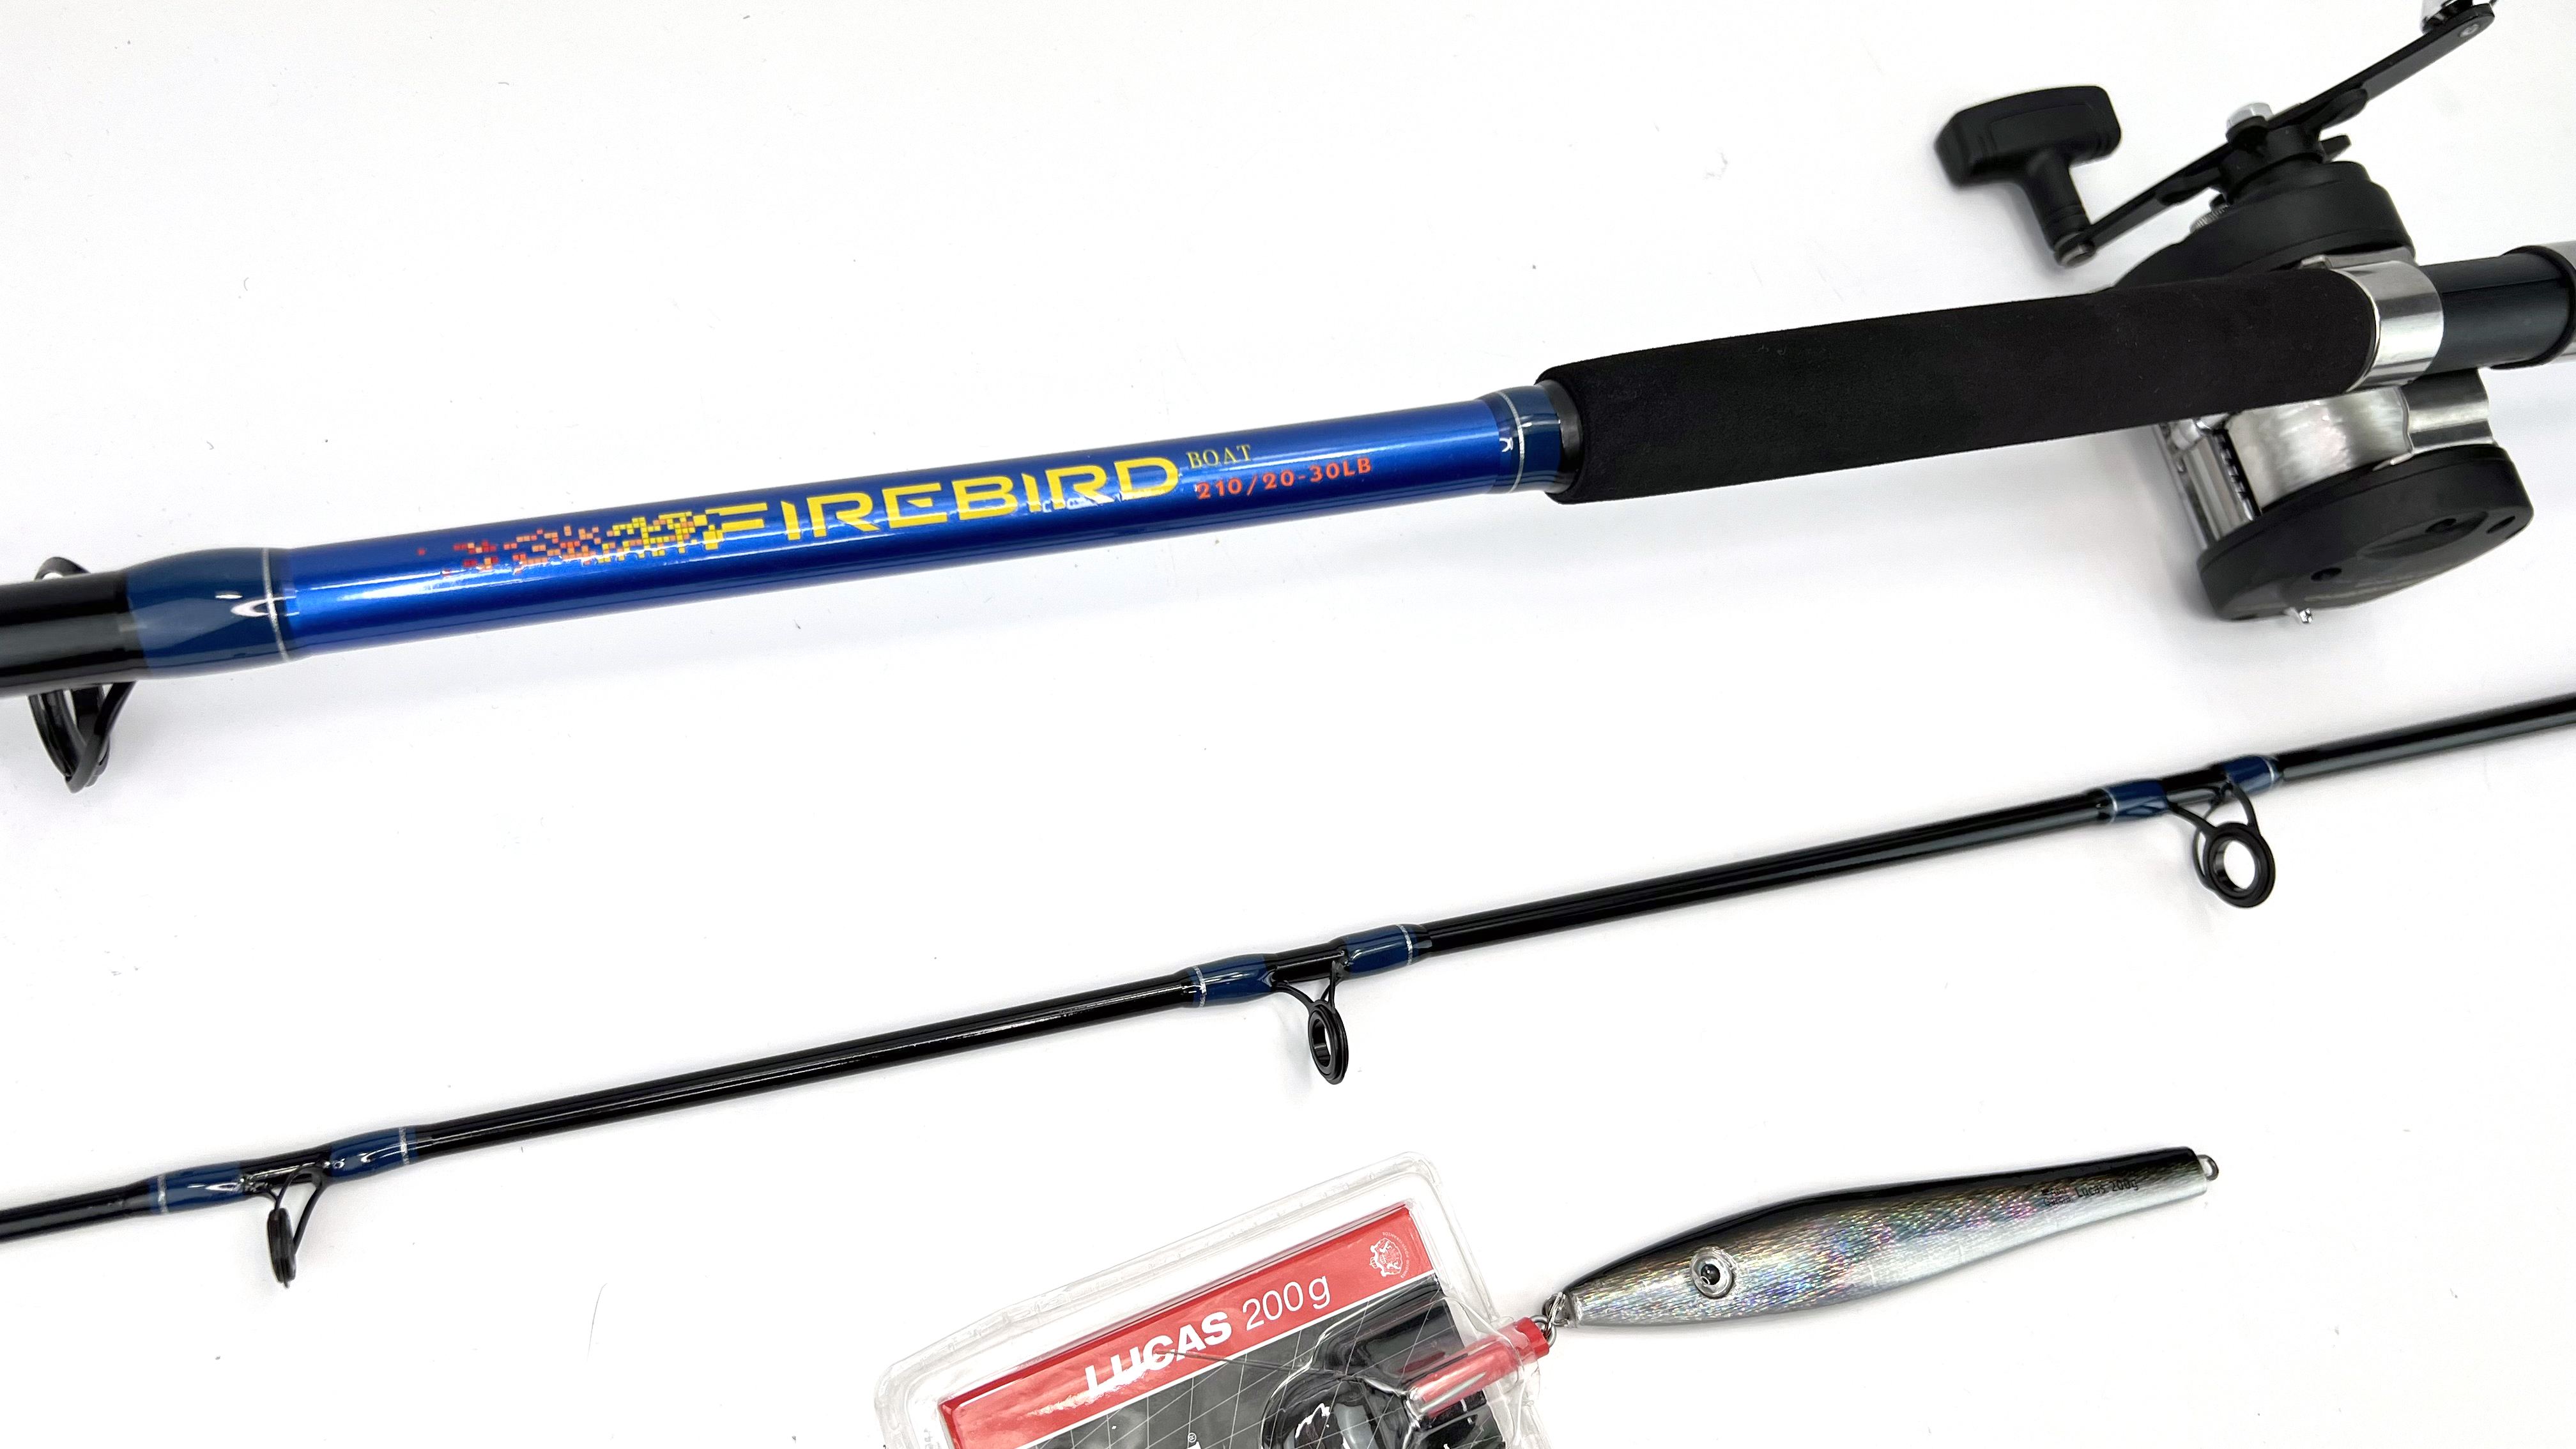 AXIA 20-30lb Charter Boat Rod and Reel 2pc – Glasgow Angling Centre